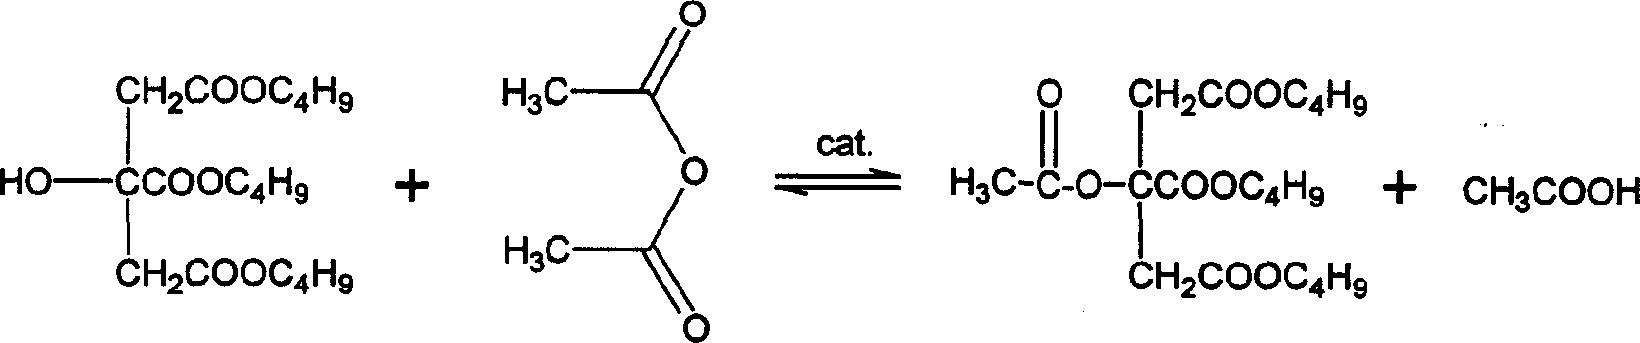 Catylatic synthesizing method of acetyl tri-in-butyl citrate